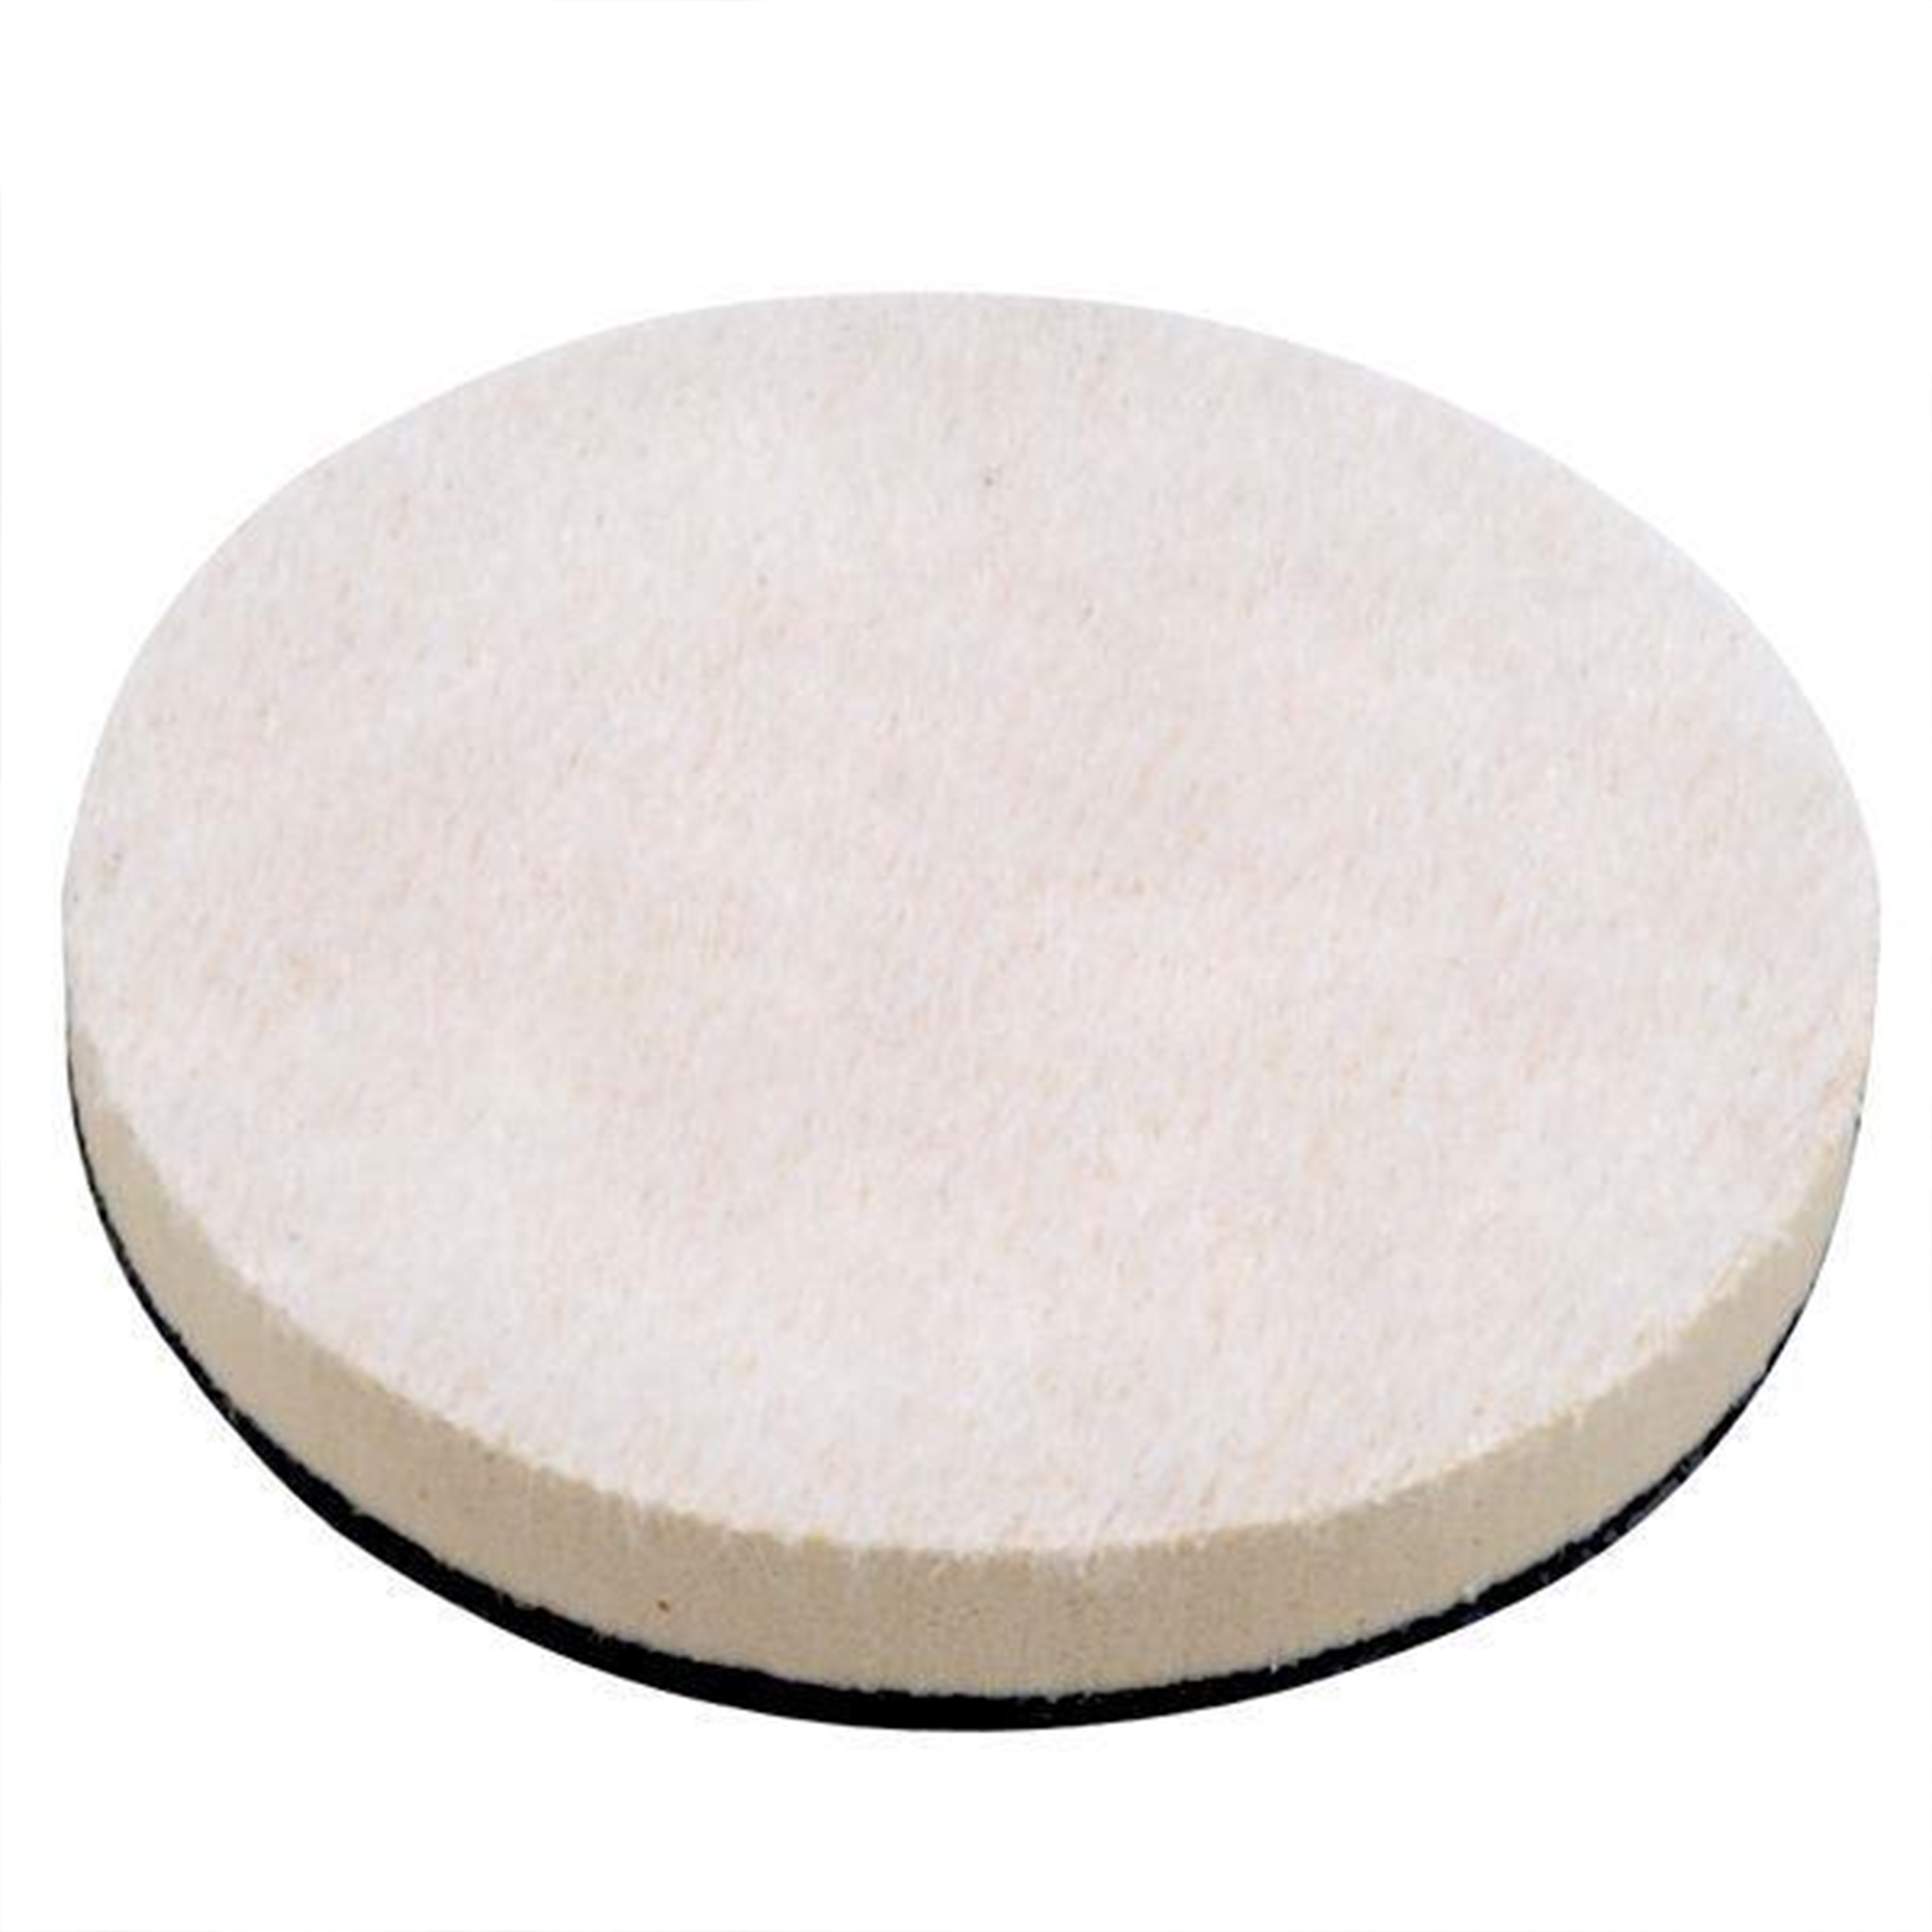 New Wave 3" Very Soft Interface Backing Pads